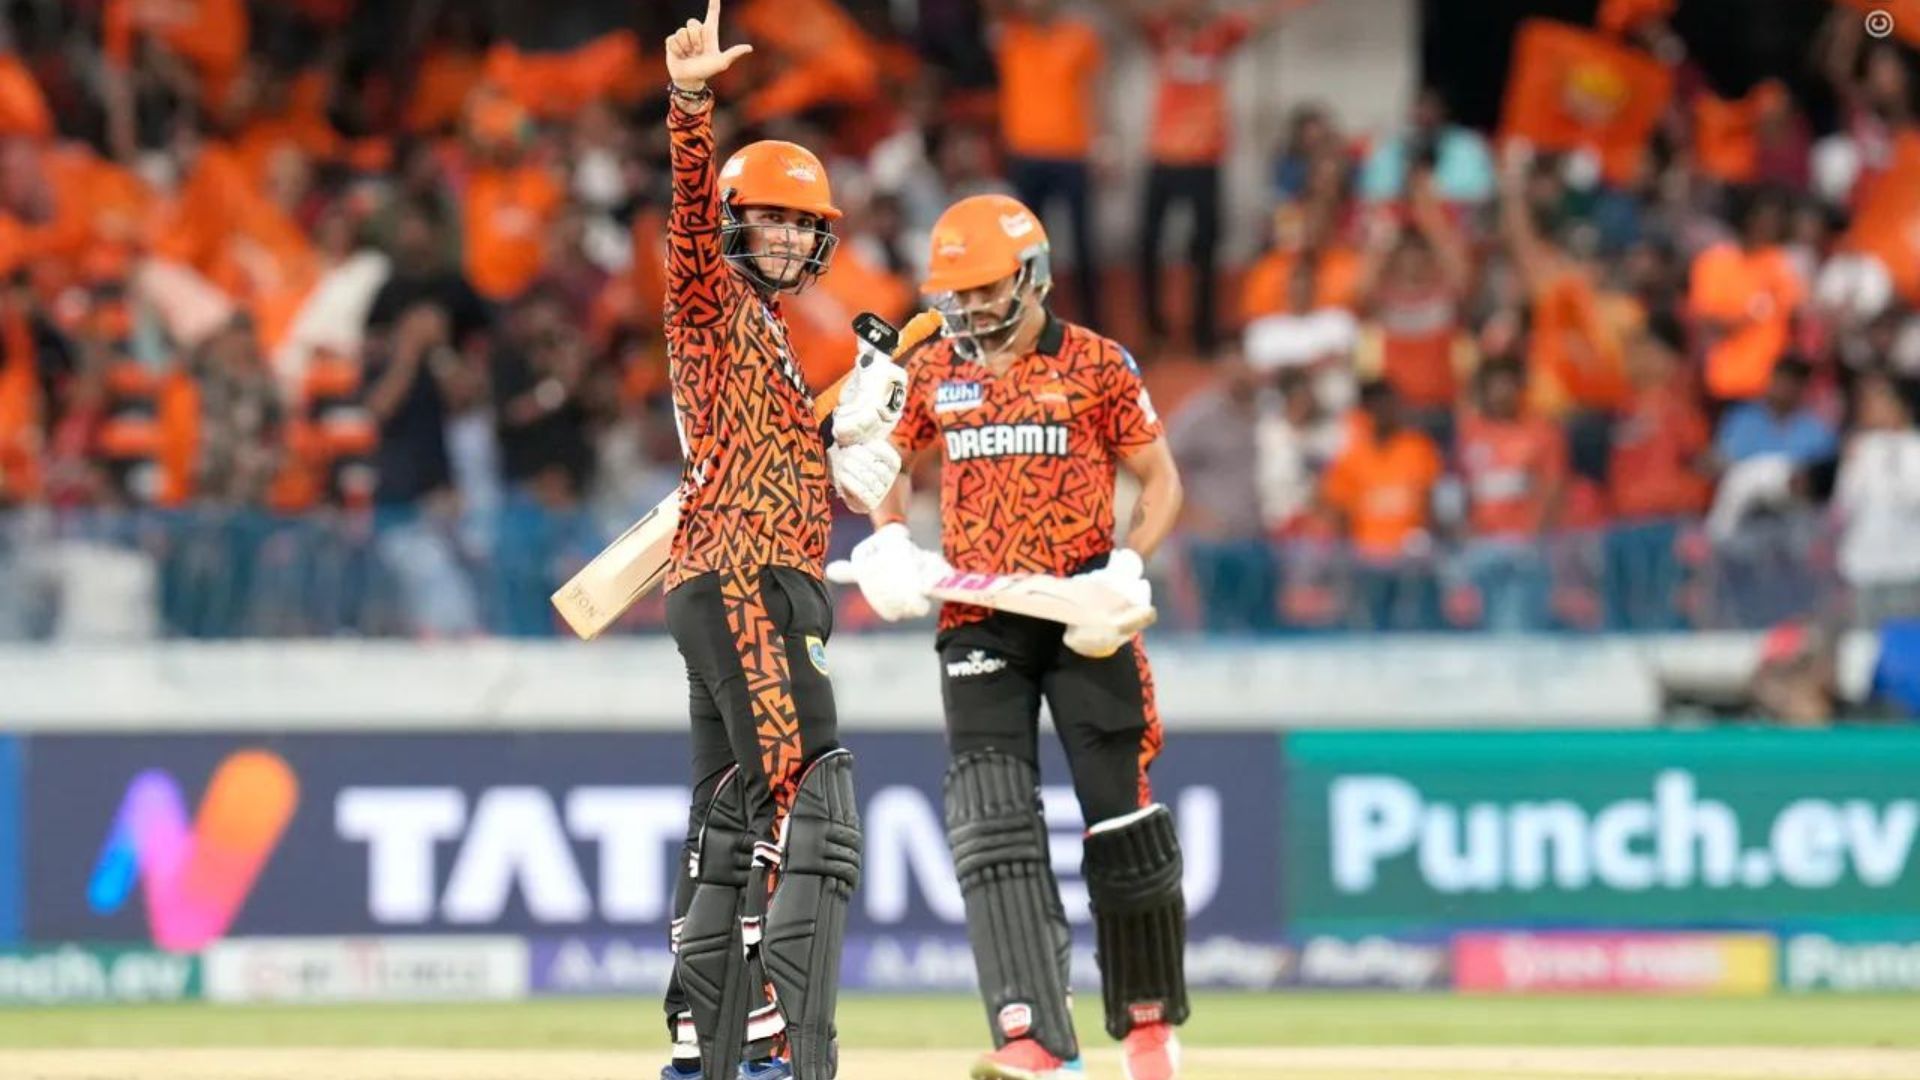 Abhishek Sharma hit a fifty as SRH cruised through a comfortable victory over PBKS (Image: BCCI/IPL)